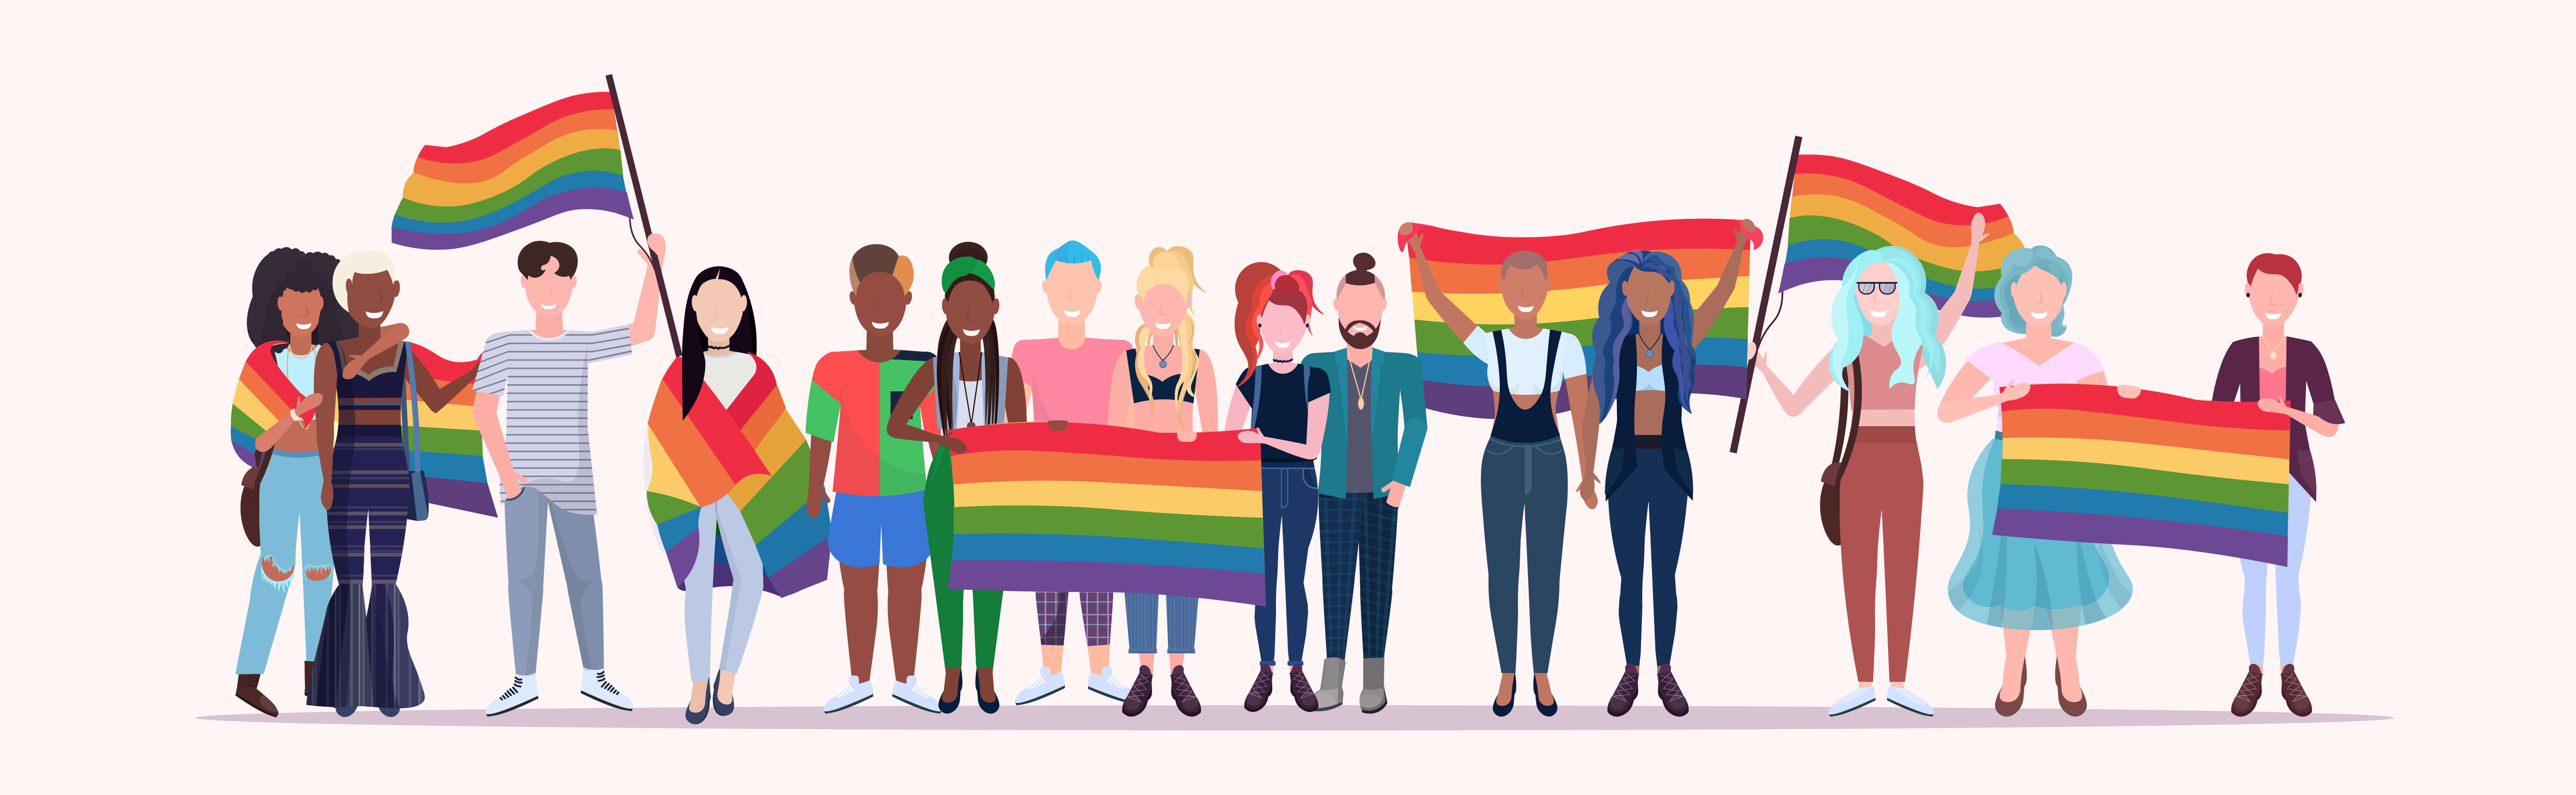 Diverse pride graphic with people and flags